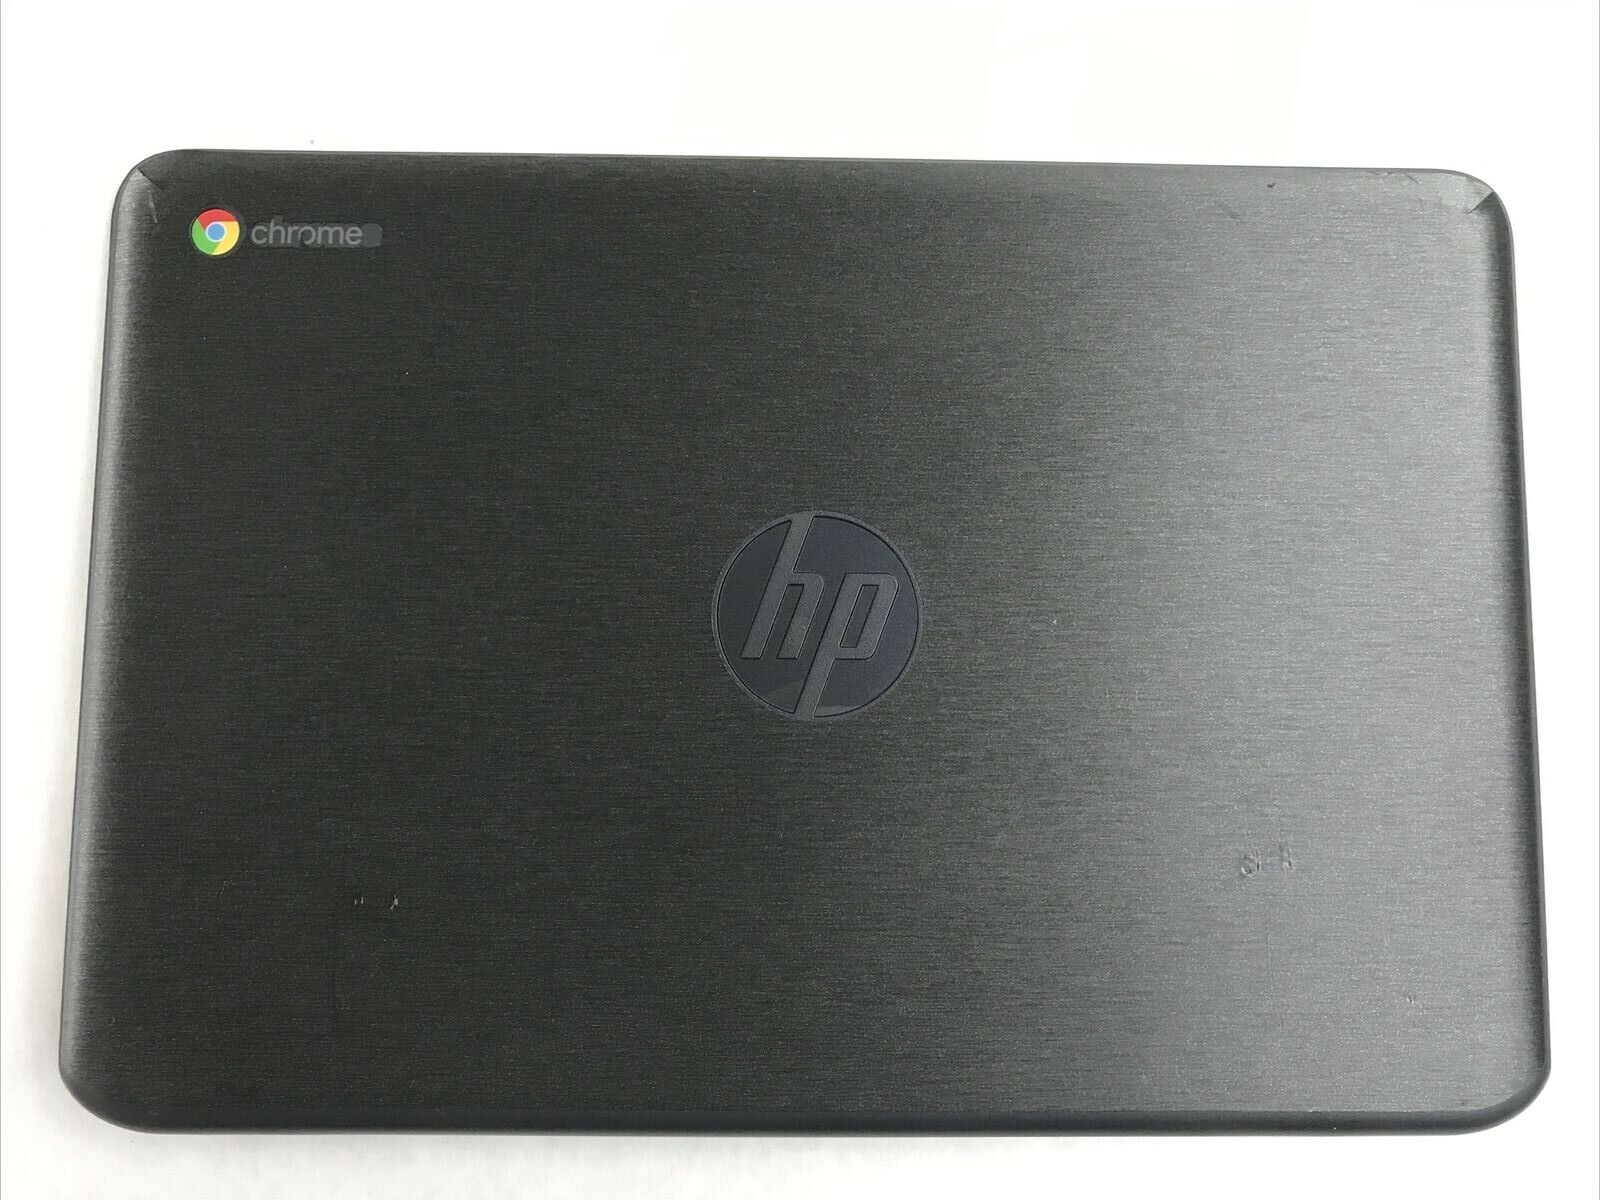 HP Chromebook 11 G6 EE LCD Back Cover 3L0G1TP603 w/ Hinges